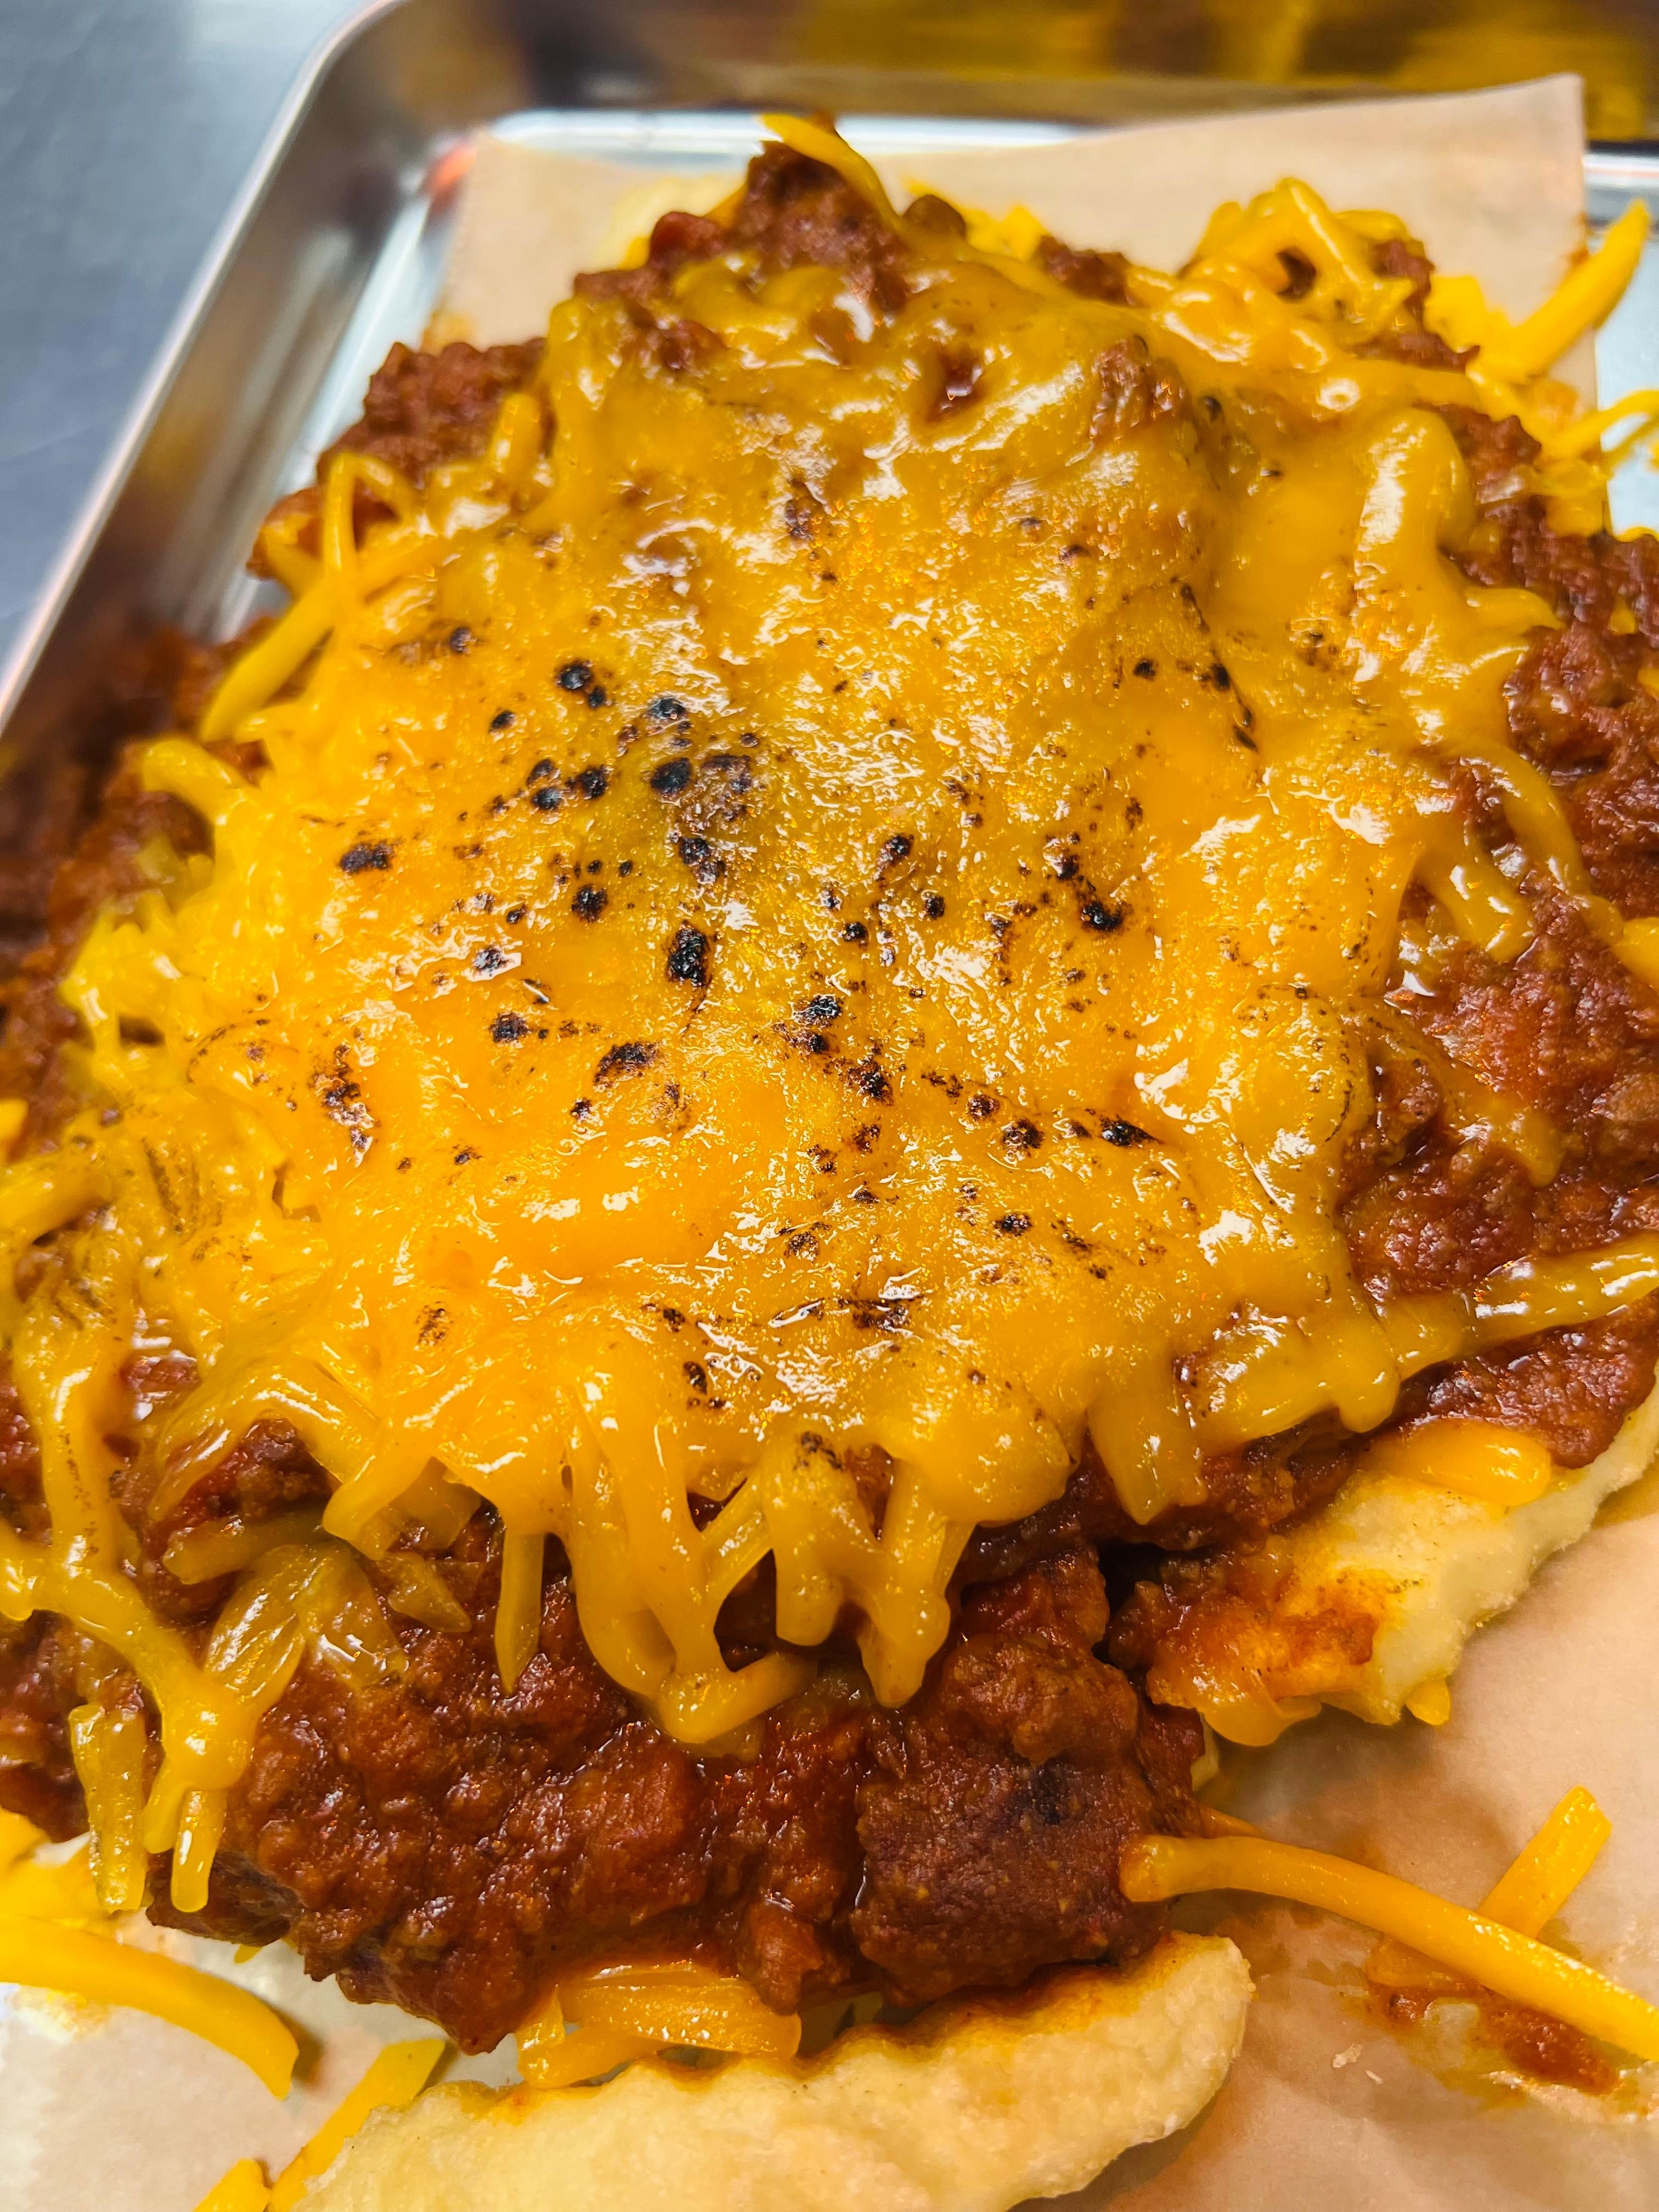 Le Chili Cheese Fries